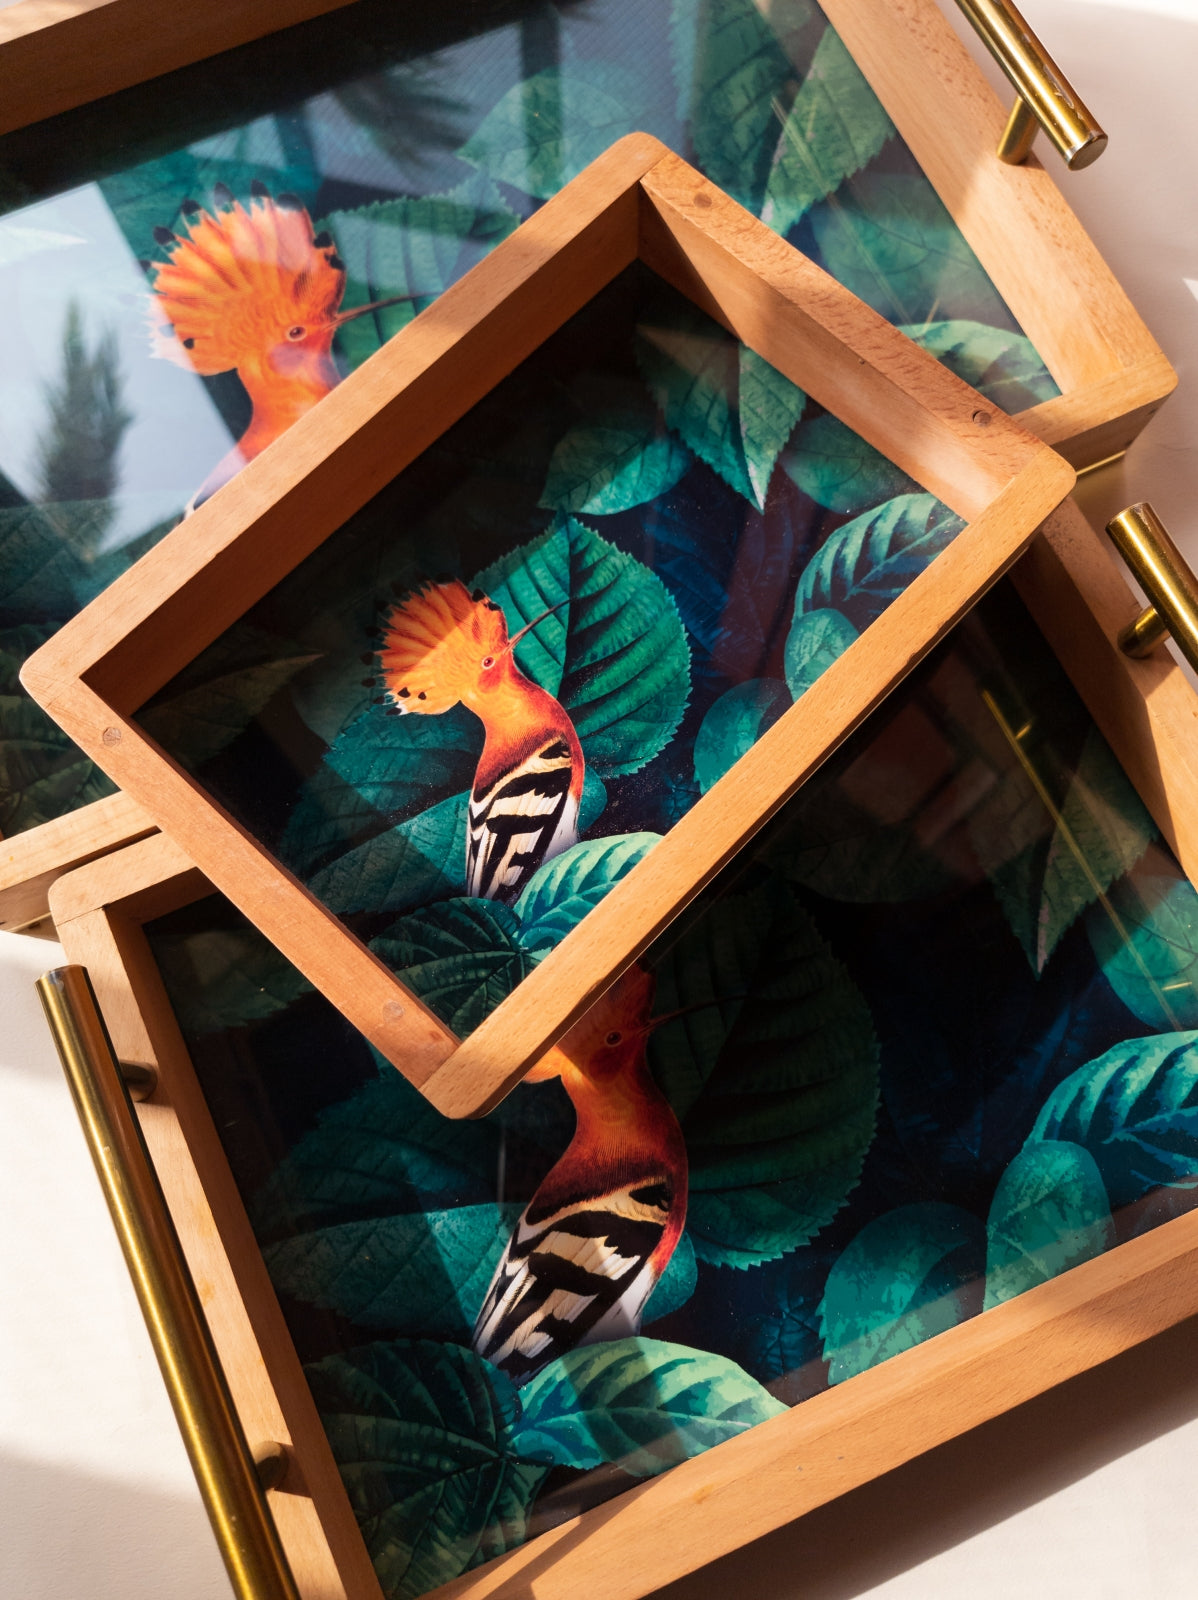 Jungle - Wooden Trays